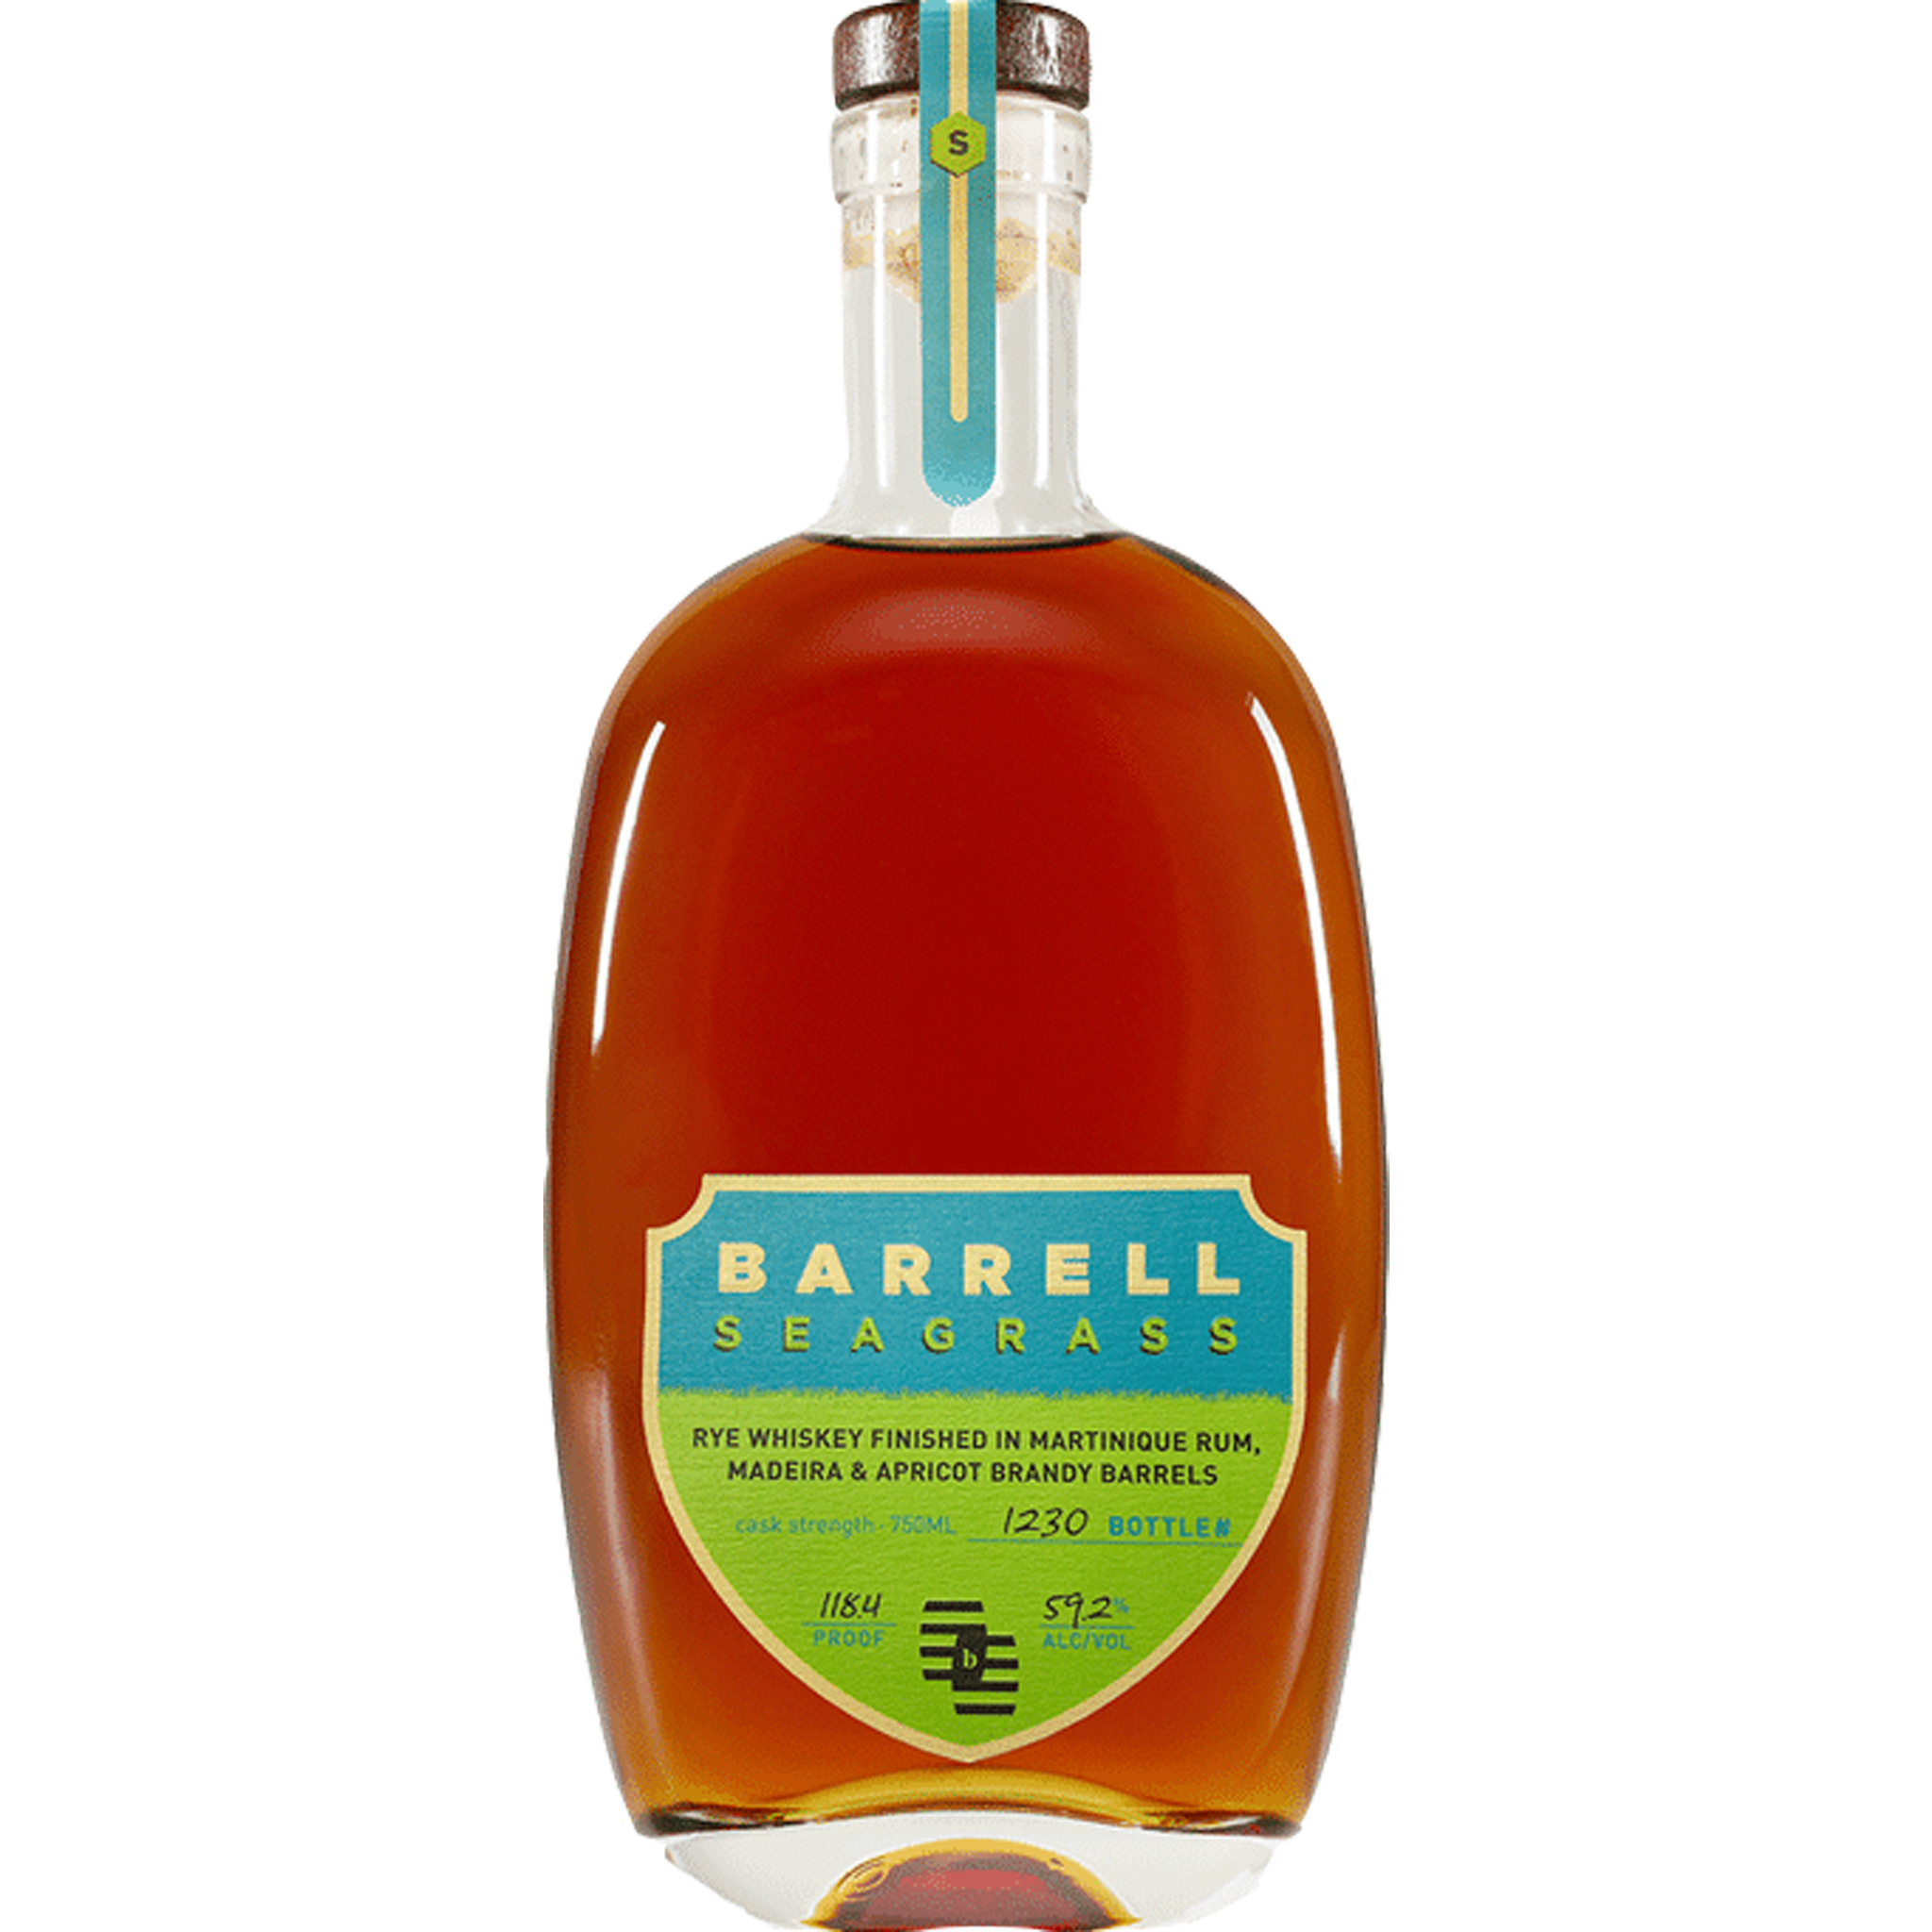 Barrell "Seagrass" Bourbon Whiskey (2021 Limited Edition)